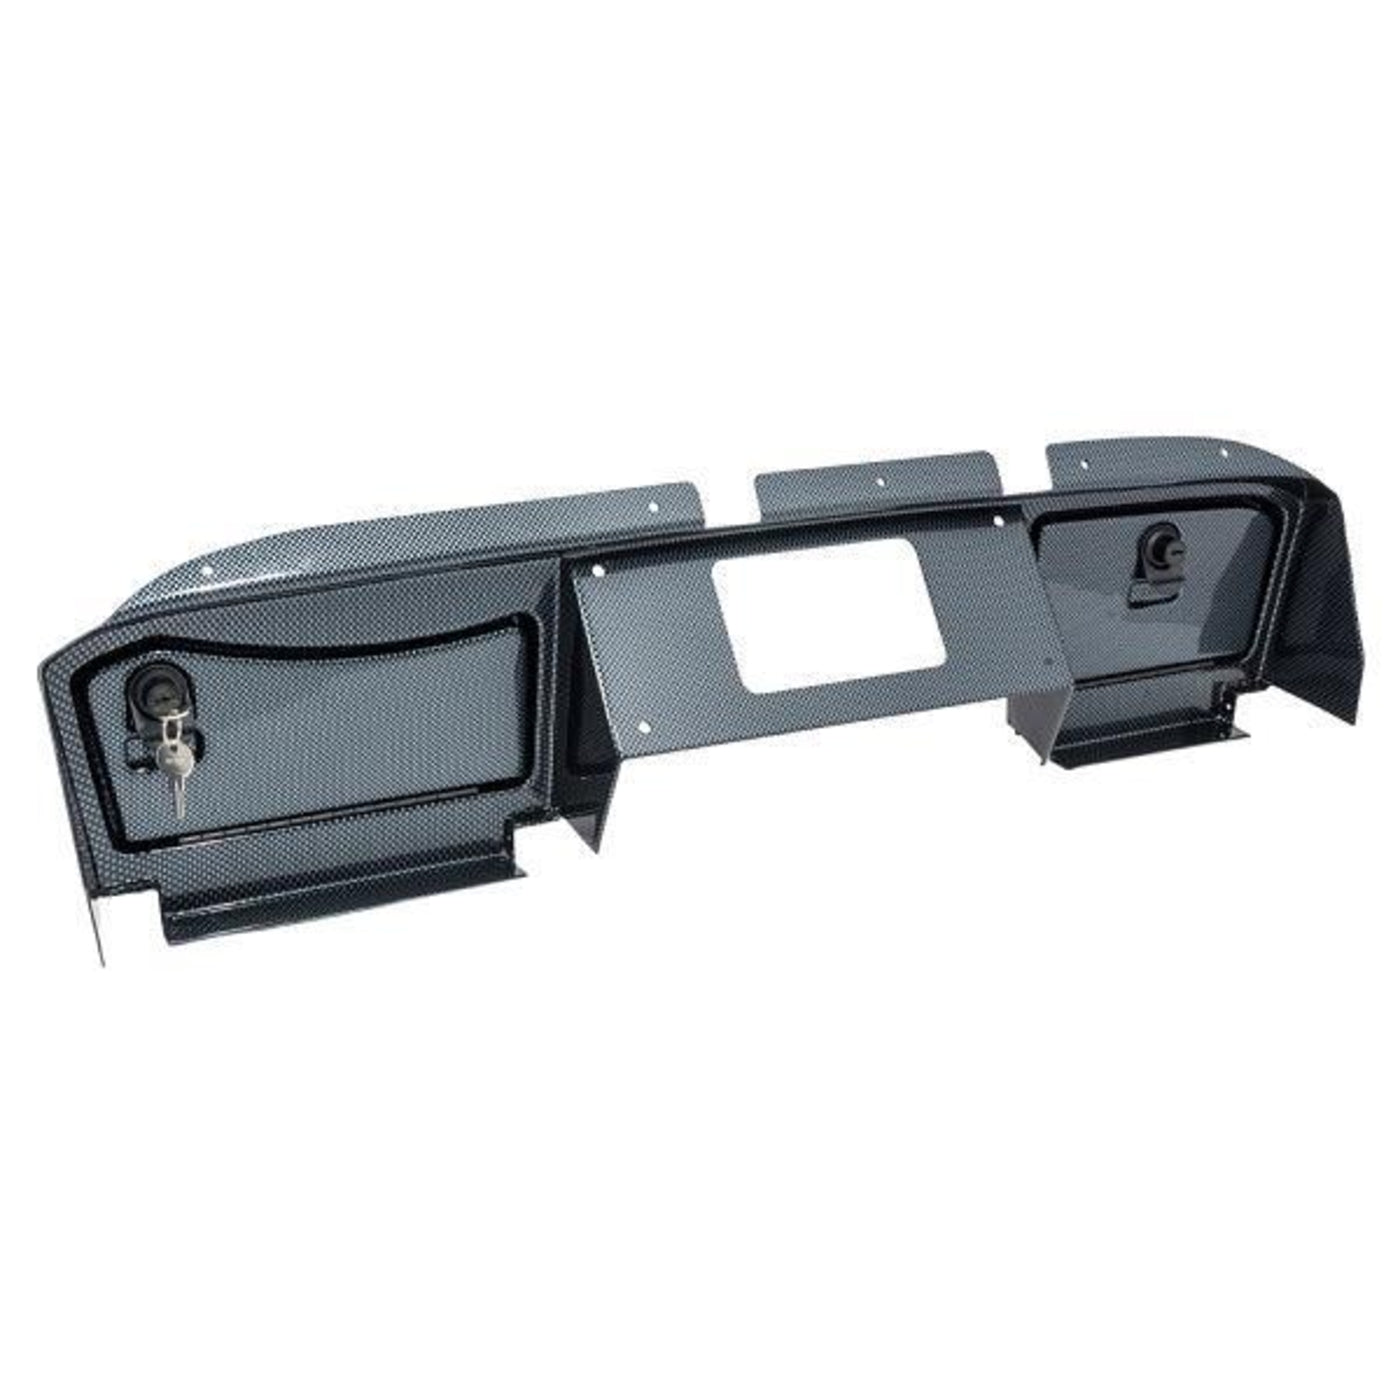 E-Z-GO RXV Carbon Fiber Dash Cover with Locking Doors (Years 2016-Up)